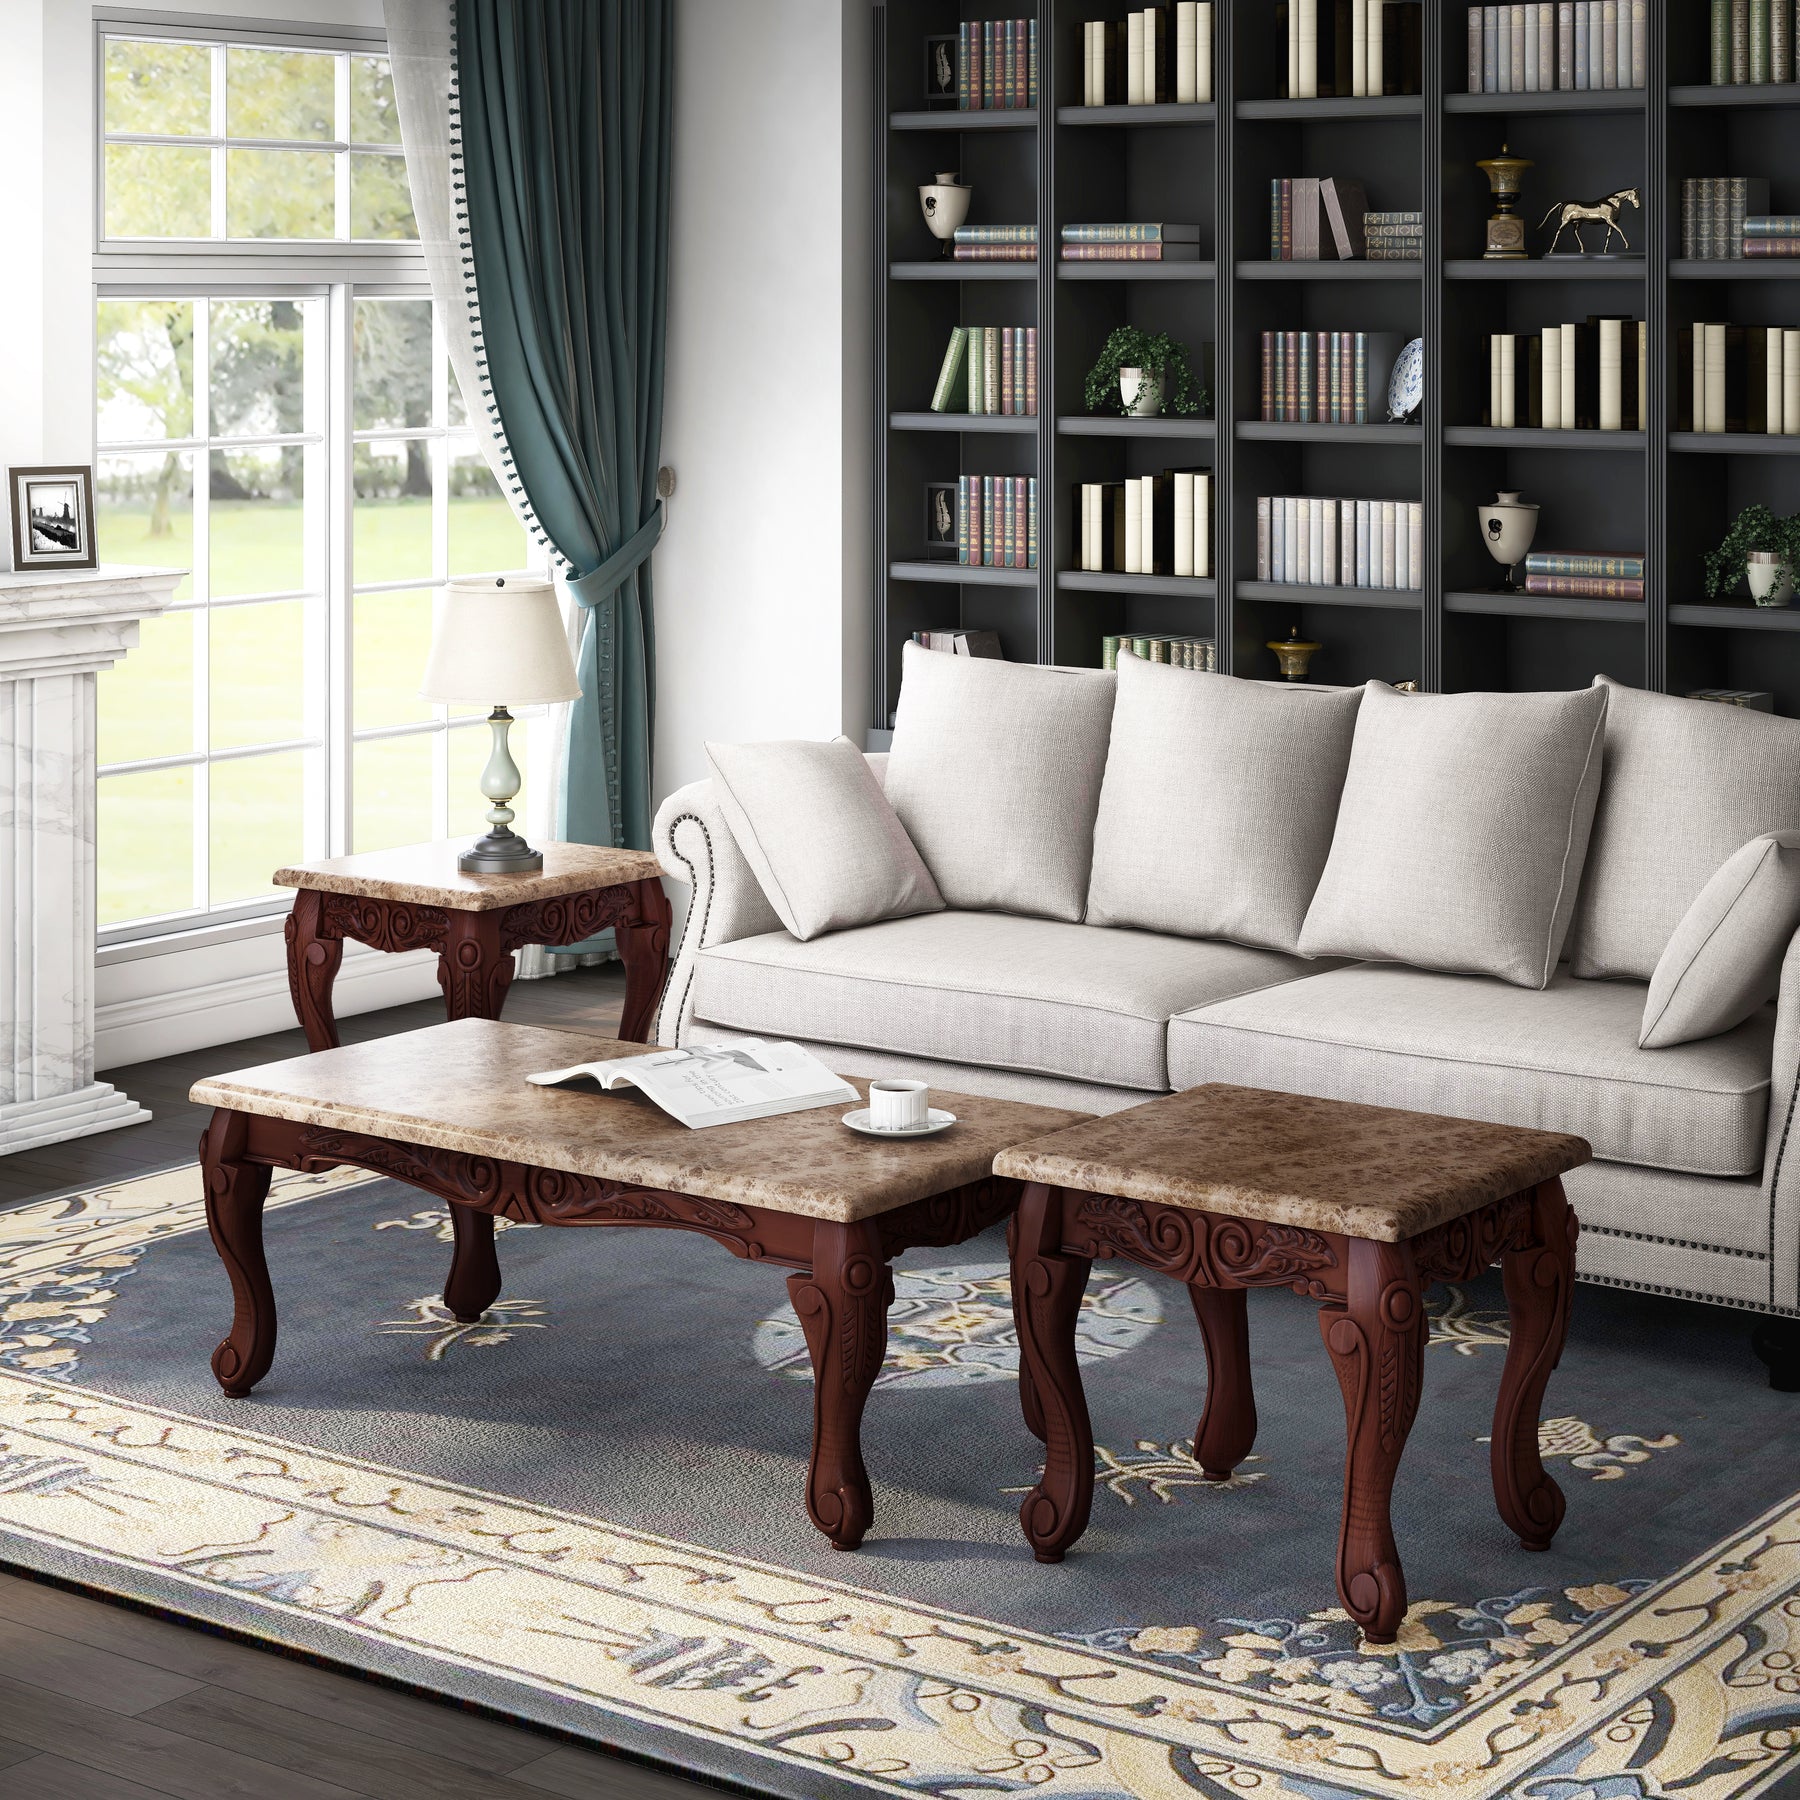 The Importance of Choosing the Right Furniture for Your Home